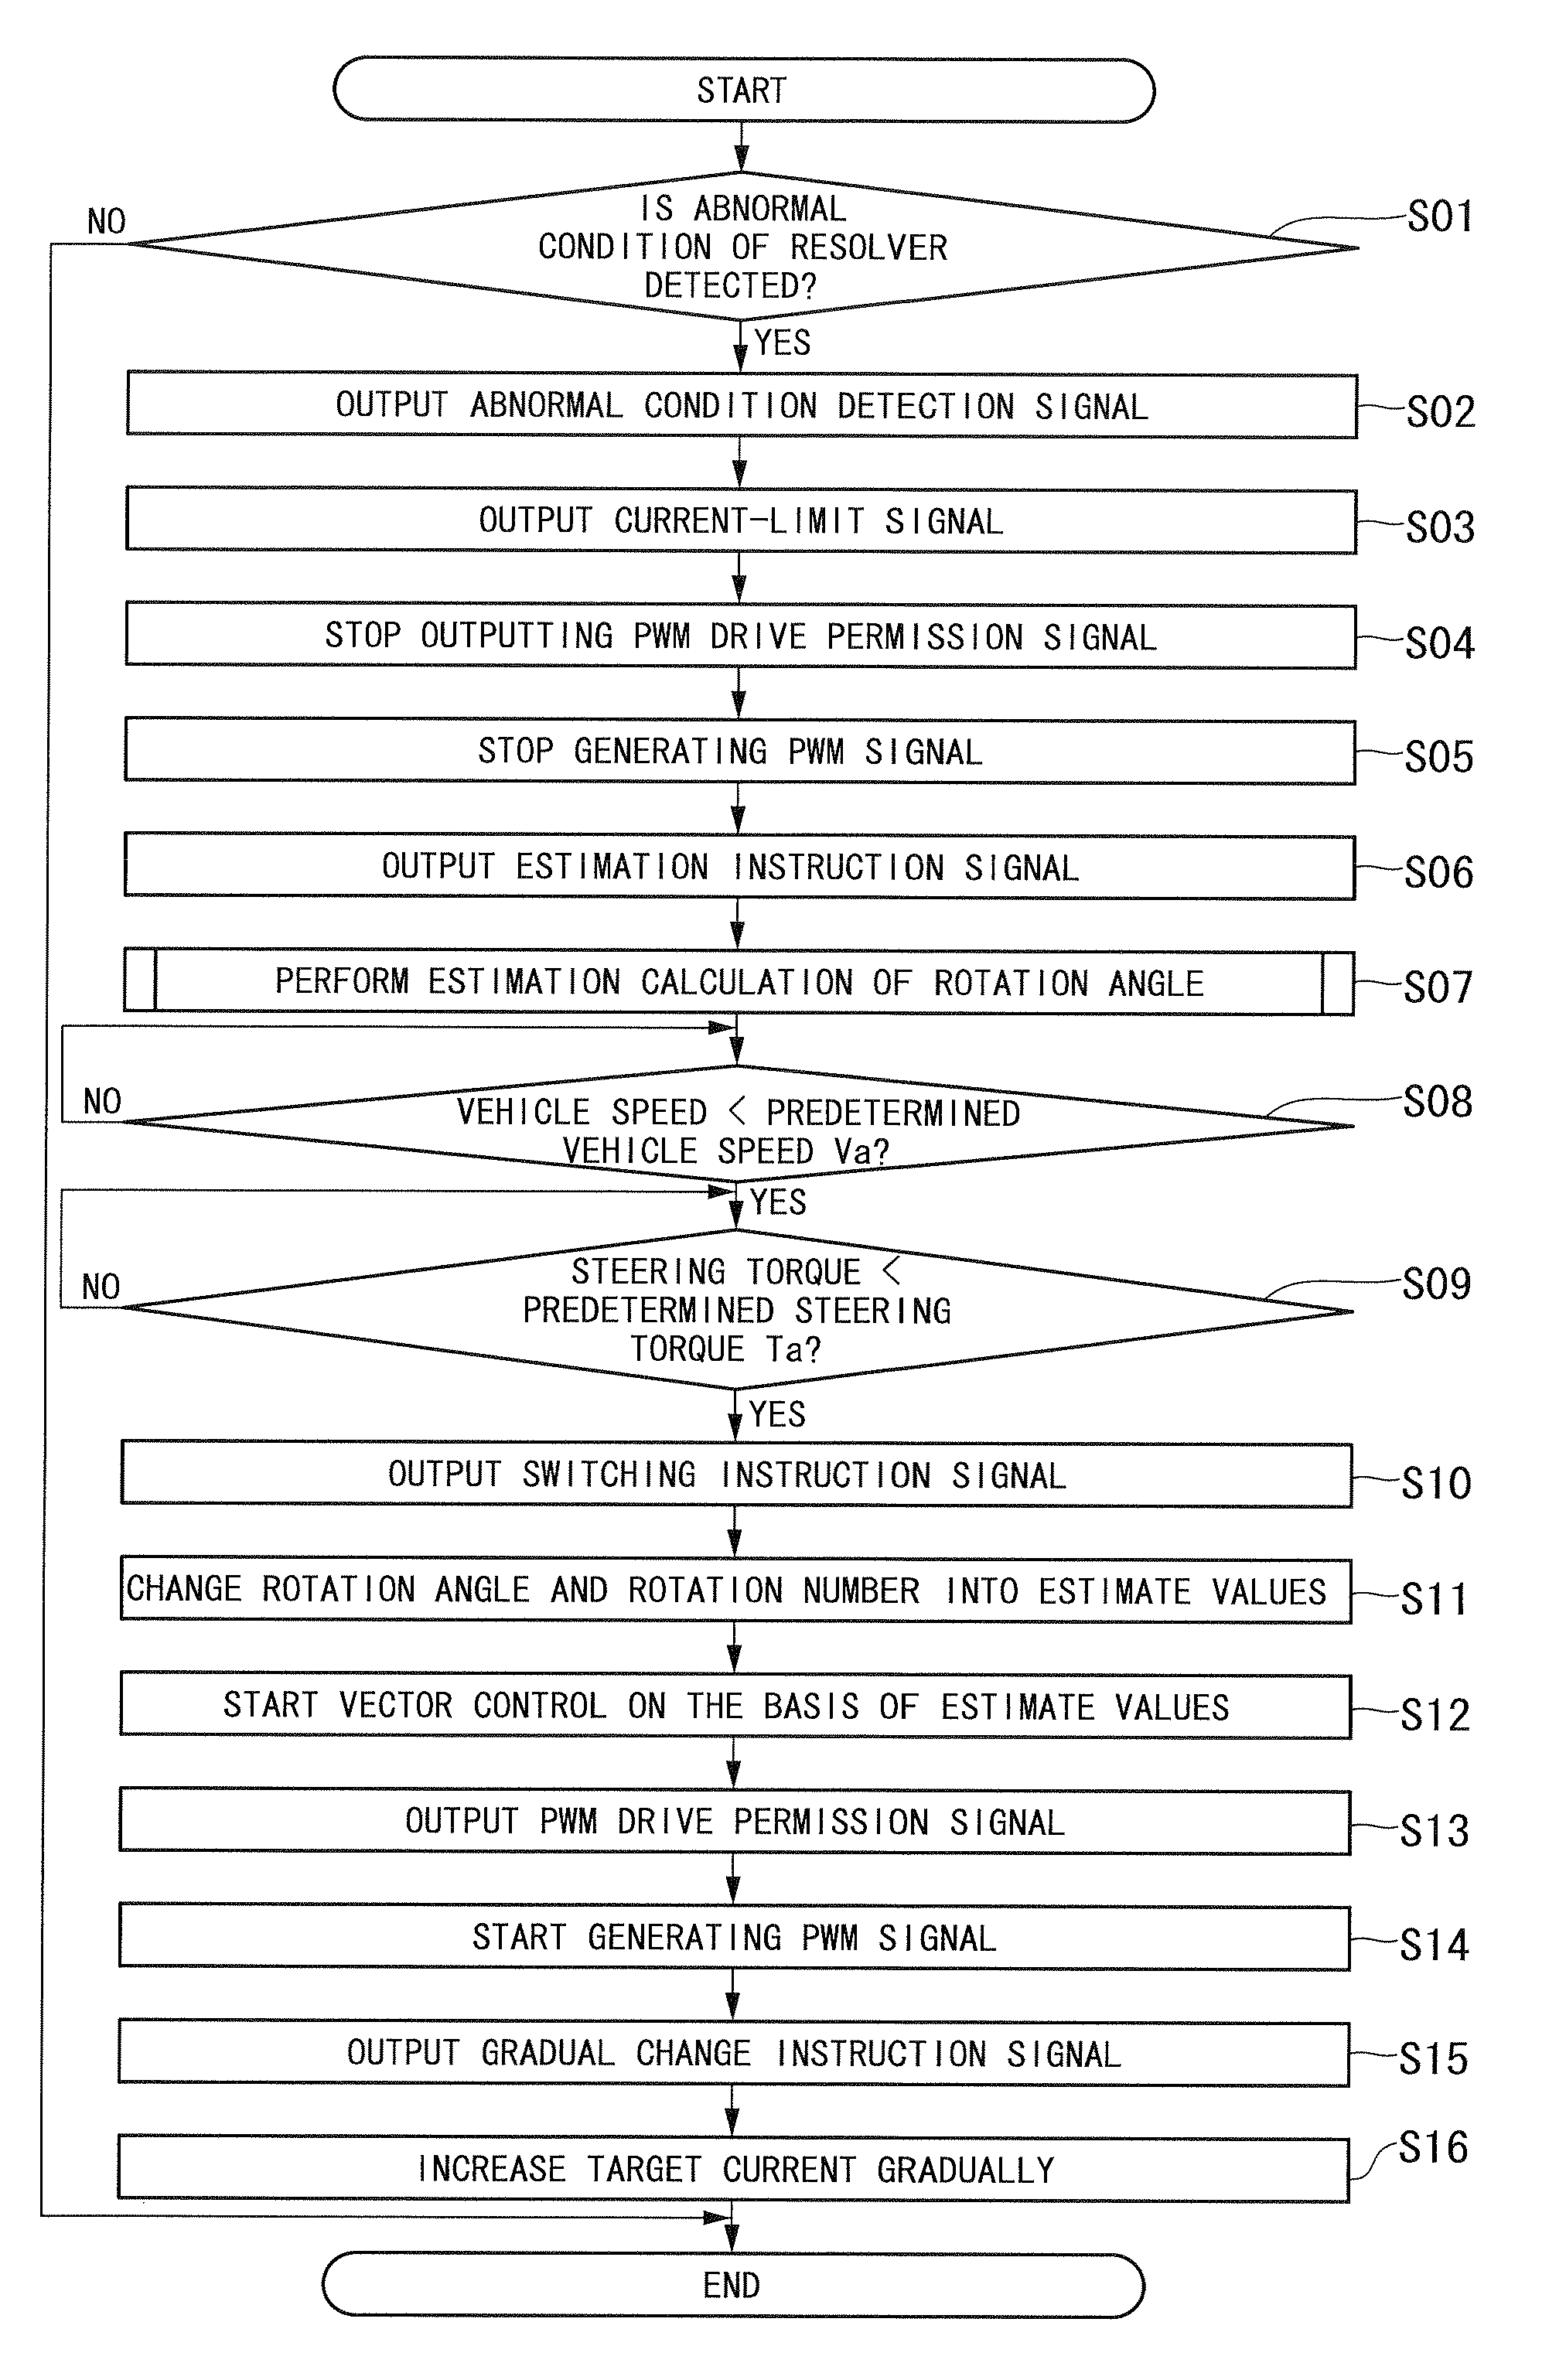 Motor control device and electric steering system